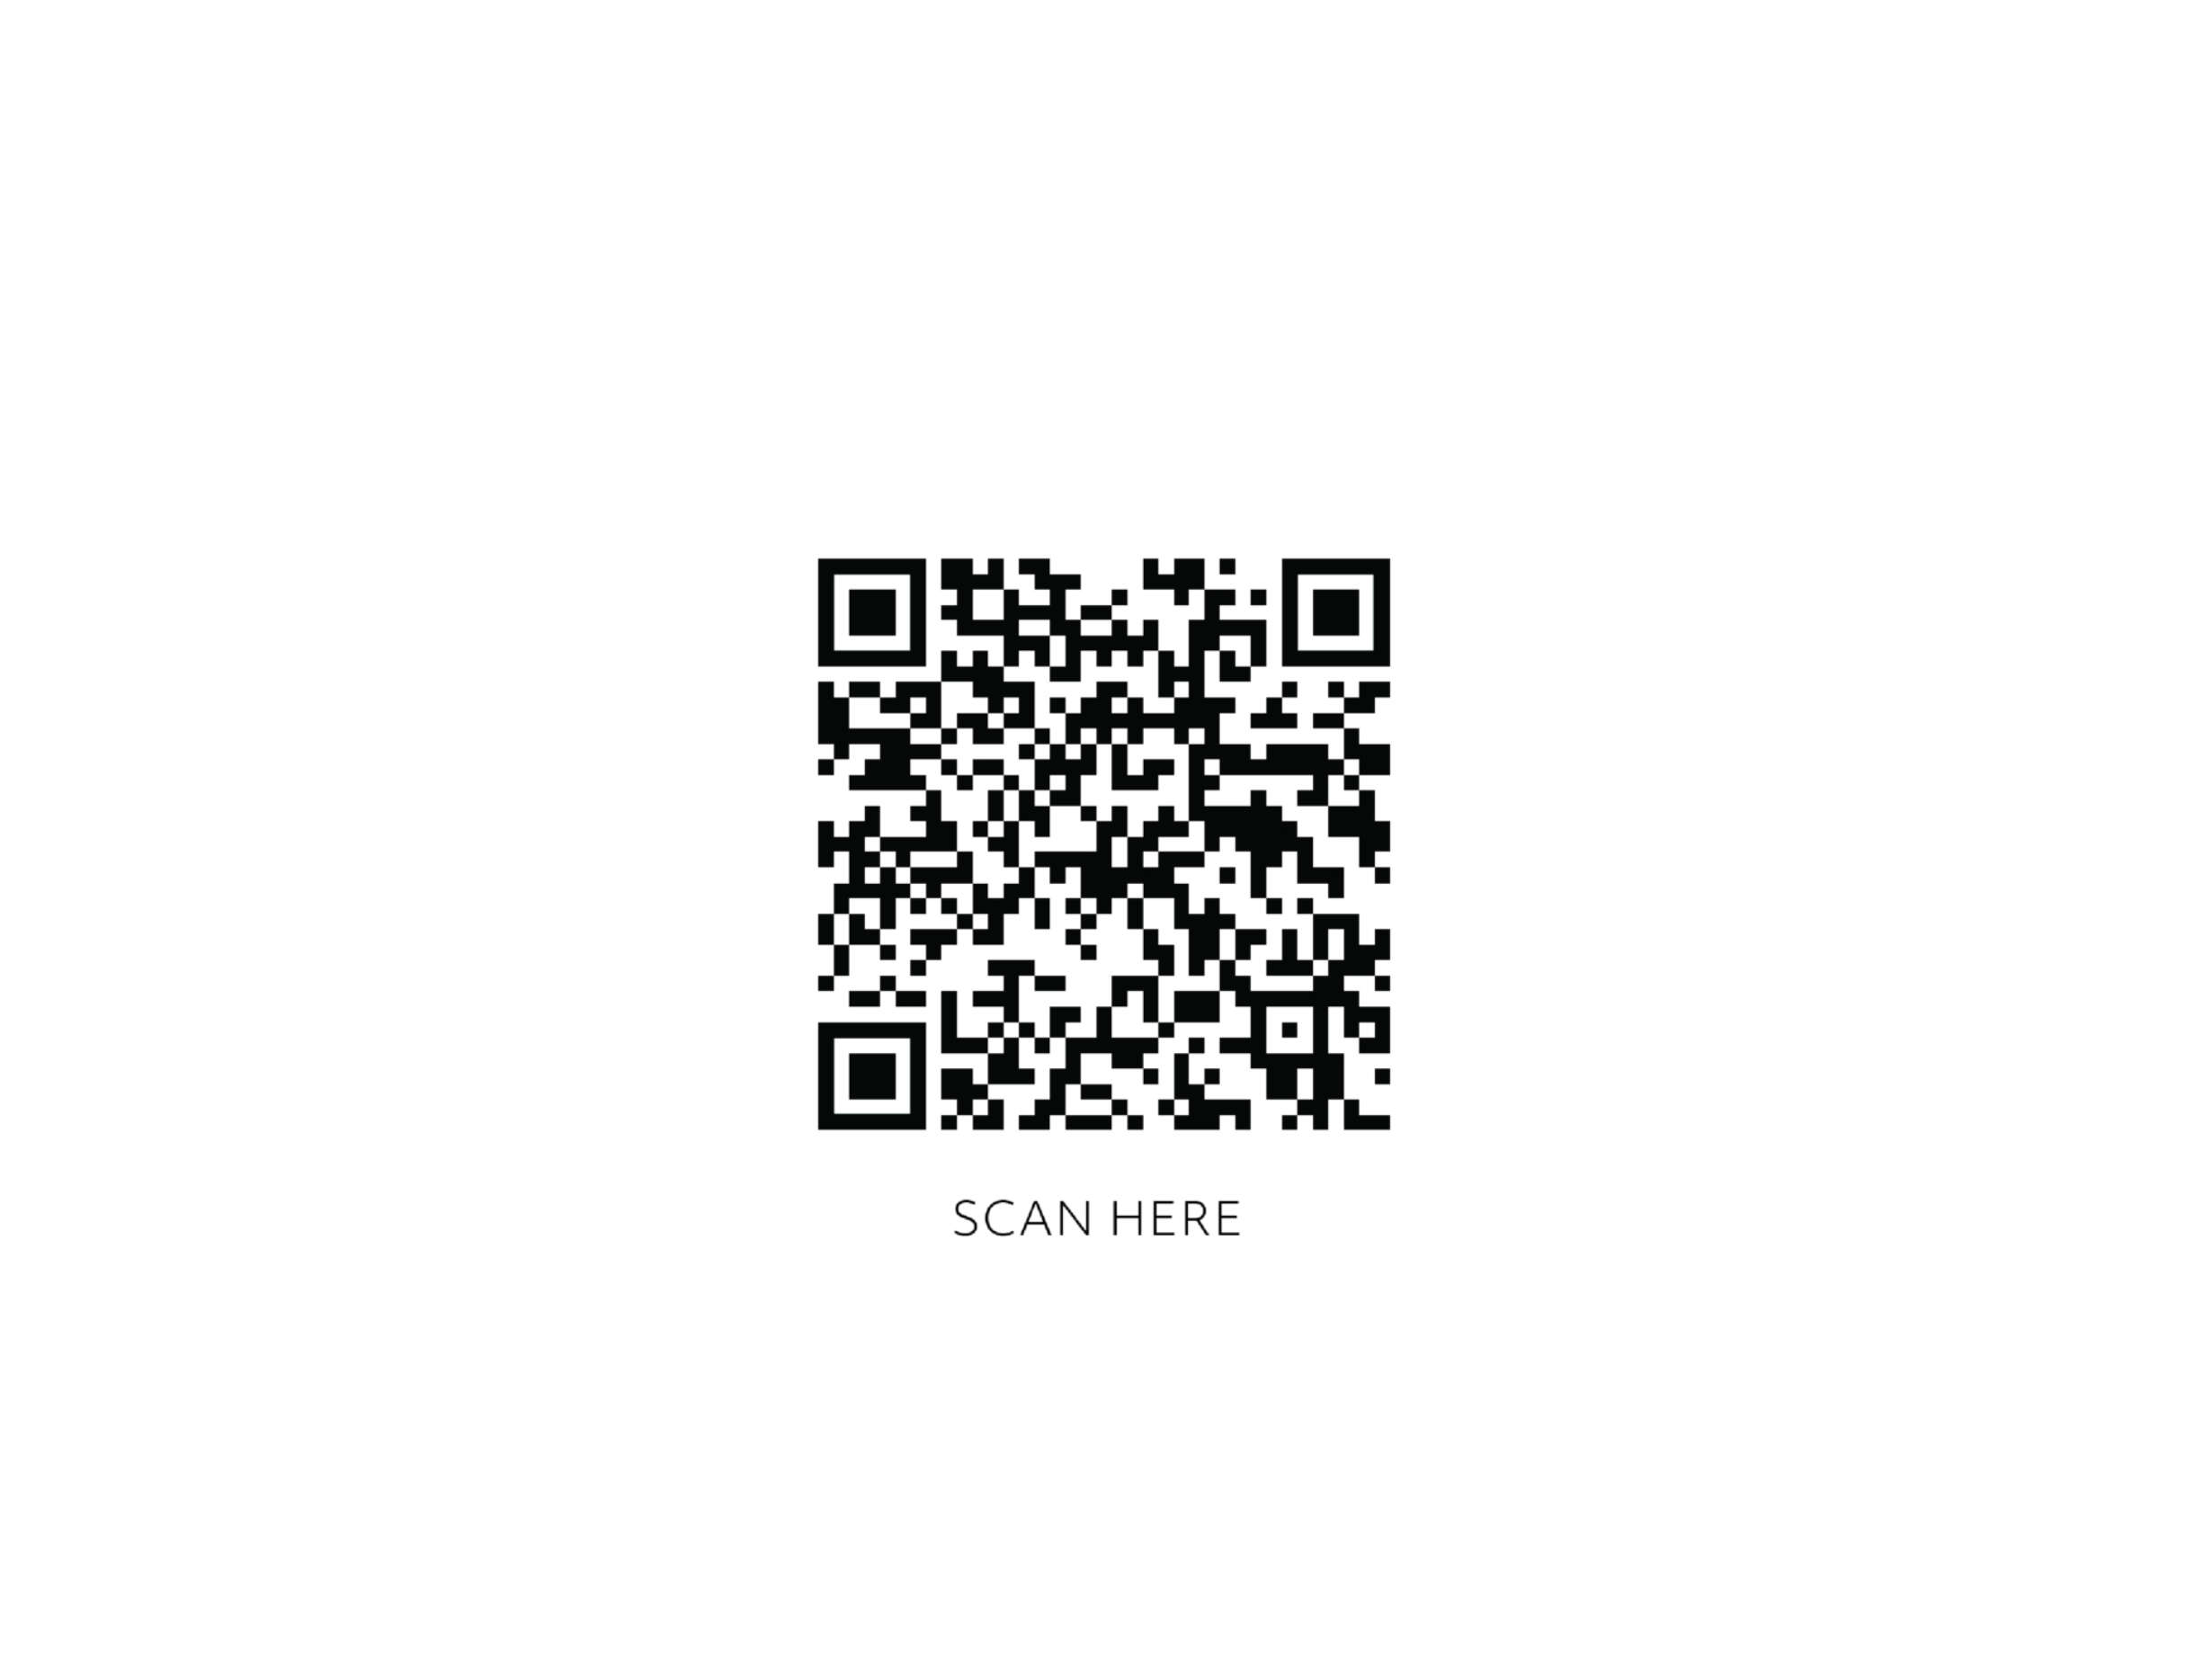 The QR code links to a prototype of the ReSource application accessible on all smartphones